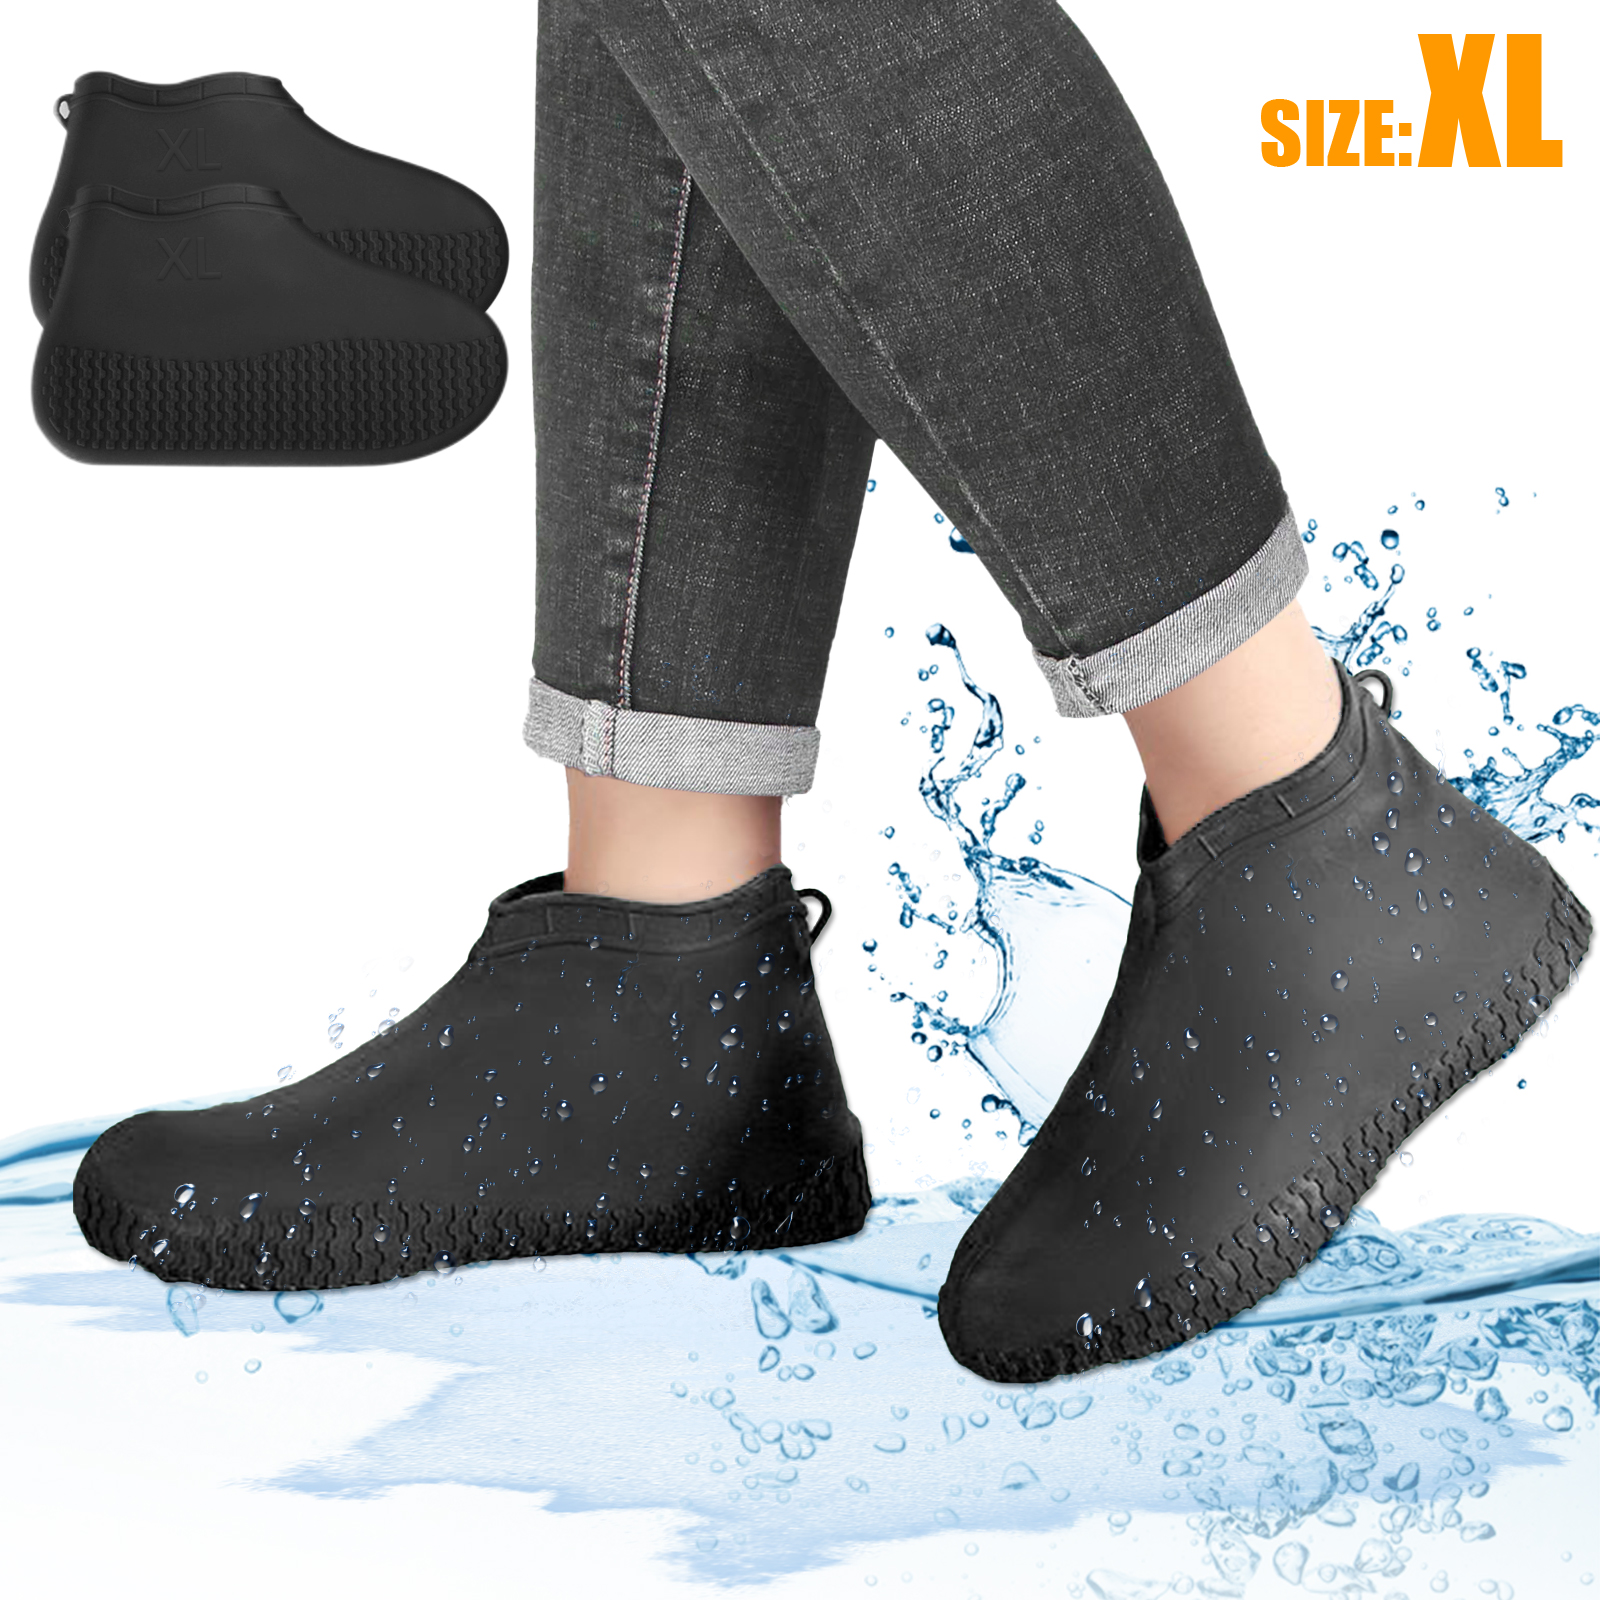 Waterproof Shoe Covers Reusable Silicone Overshoes Rain Boot Cover Protector 